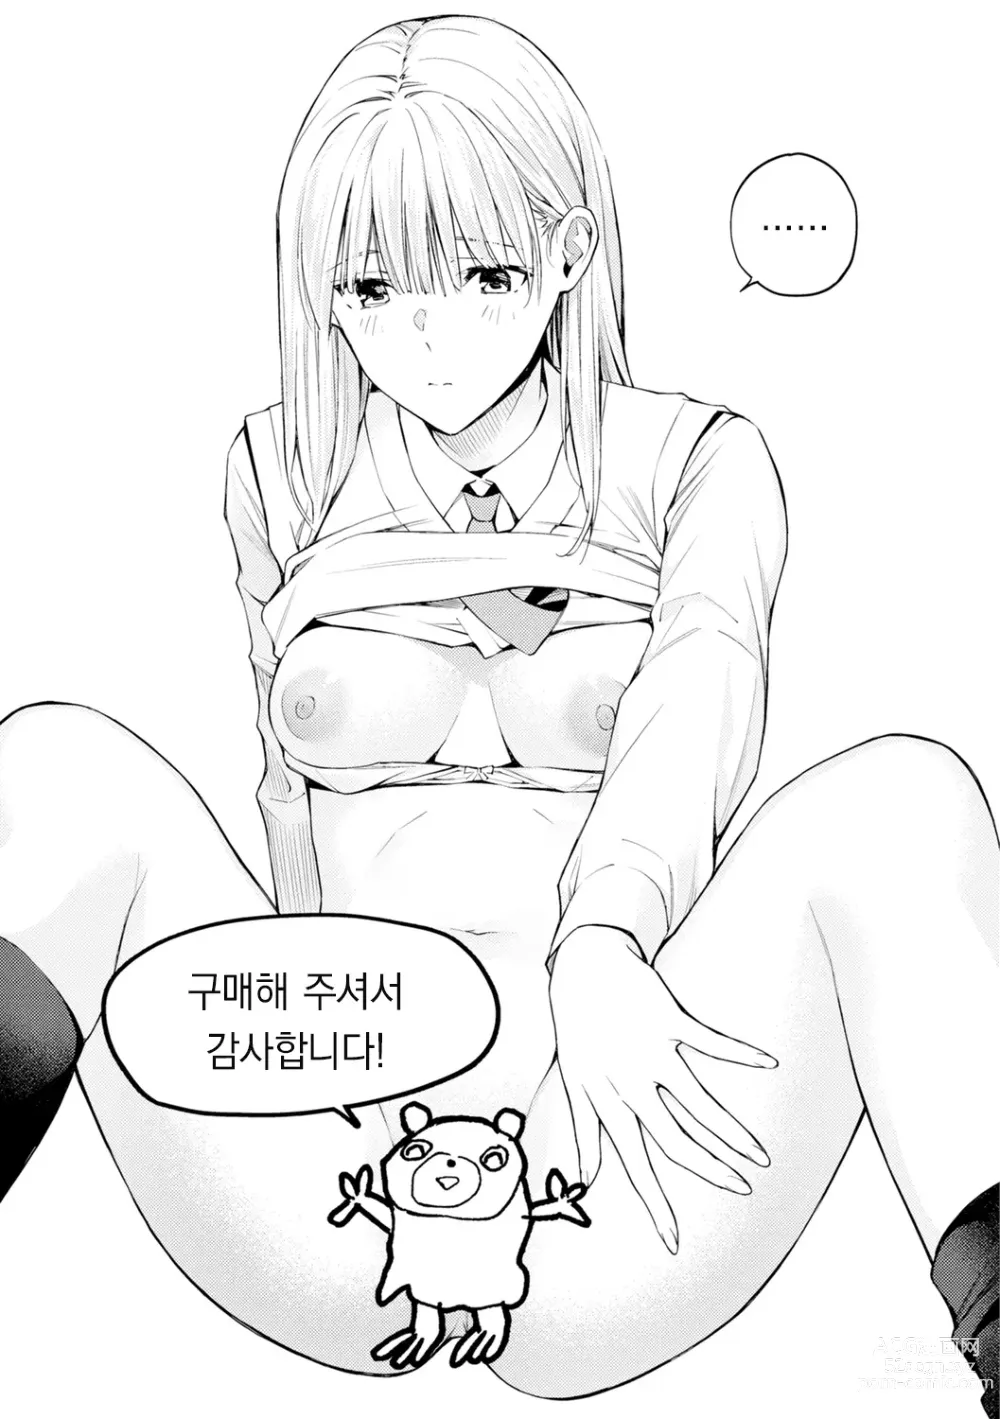 Page 161 of manga 비밀이에요. - Between You&ME